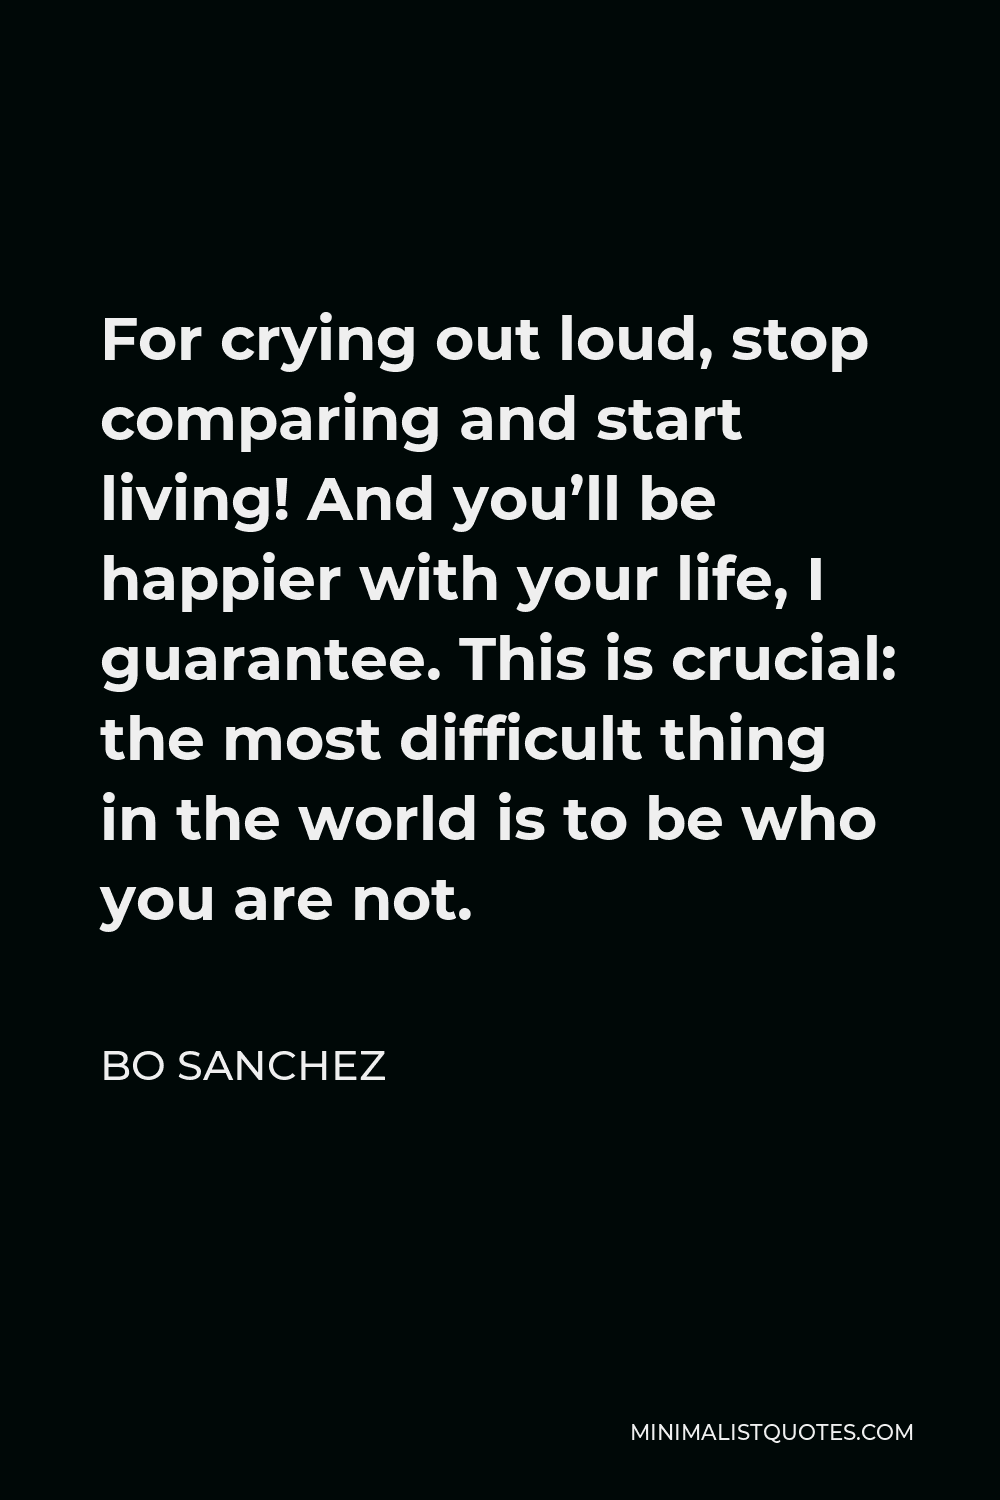 Bo Sanchez Quote - For crying out loud, stop comparing and start living! And you’ll be happier with your life, I guarantee. This is crucial: the most difficult thing in the world is to be who you are not.